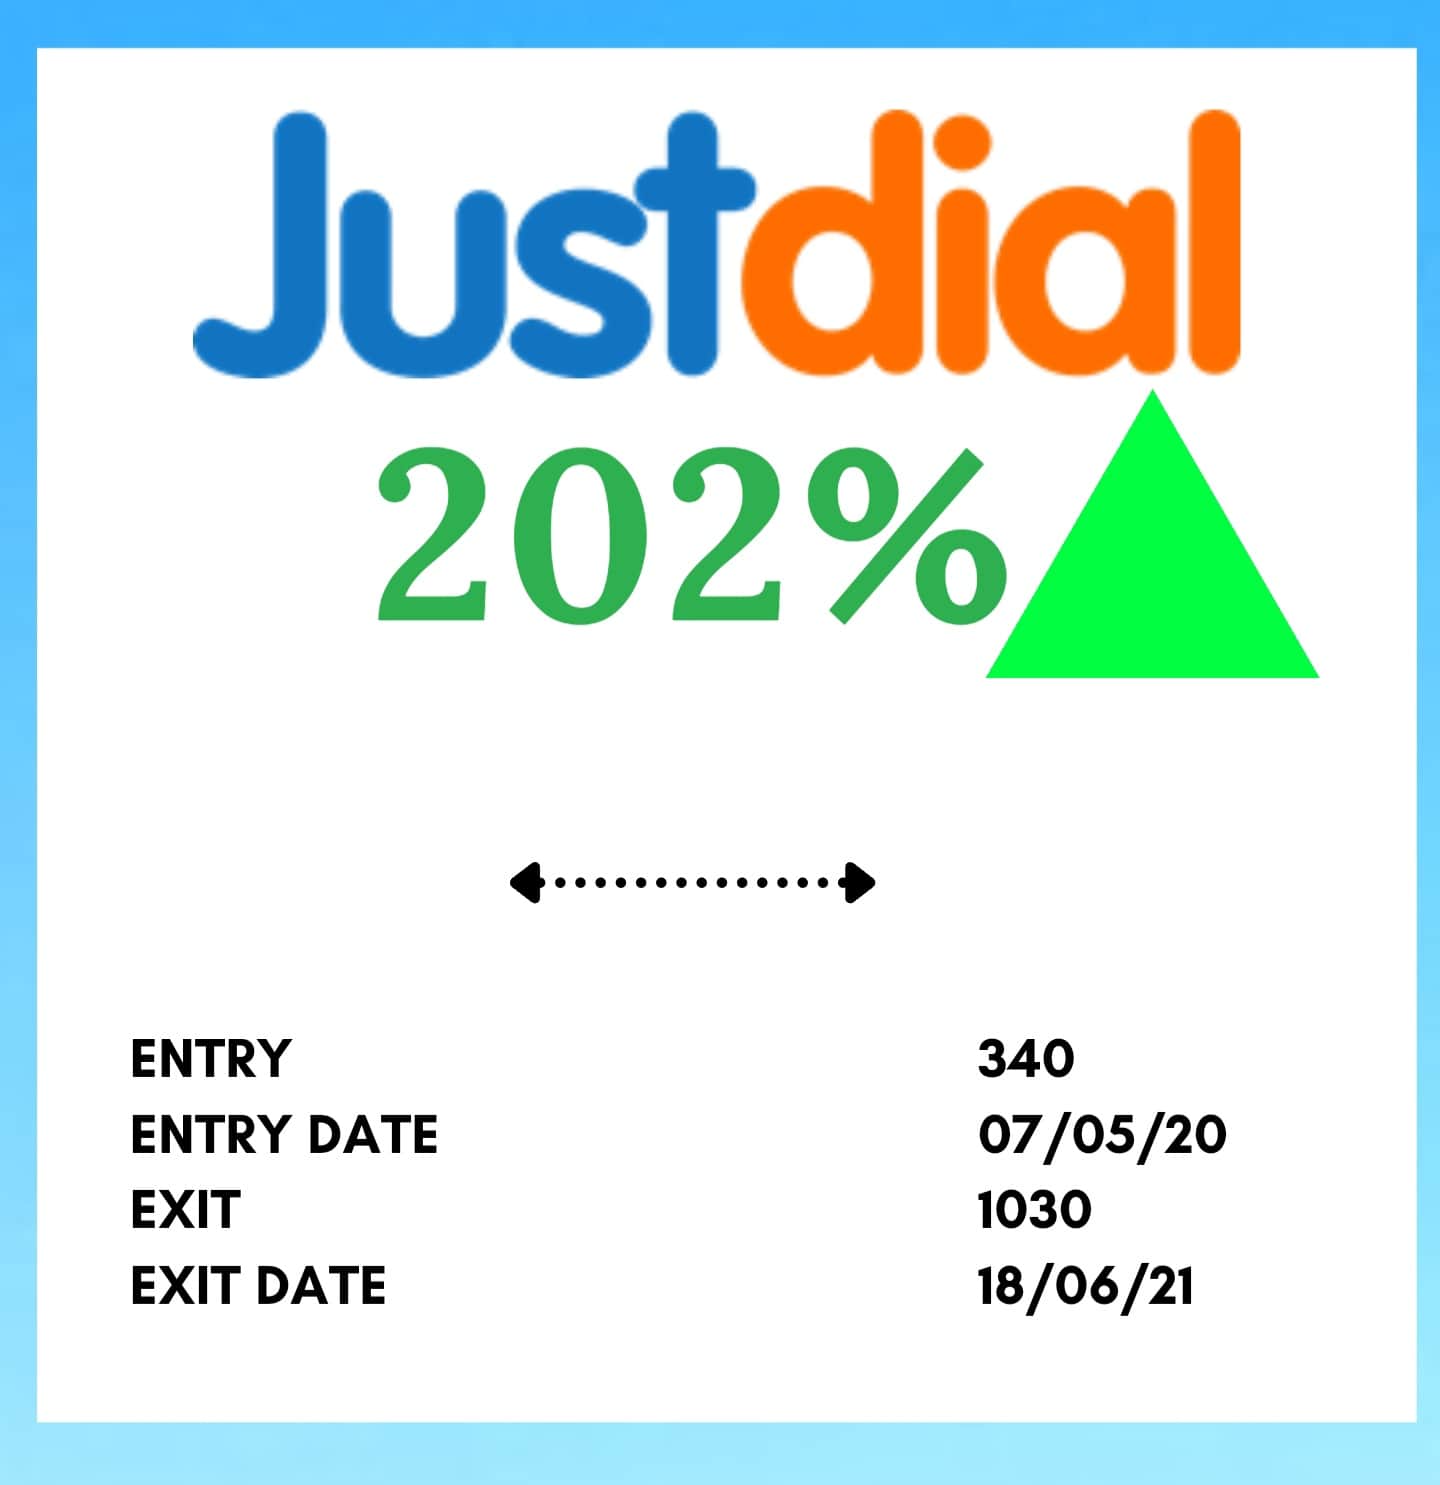 LONG-TERM SERVICES JUSTDIAL